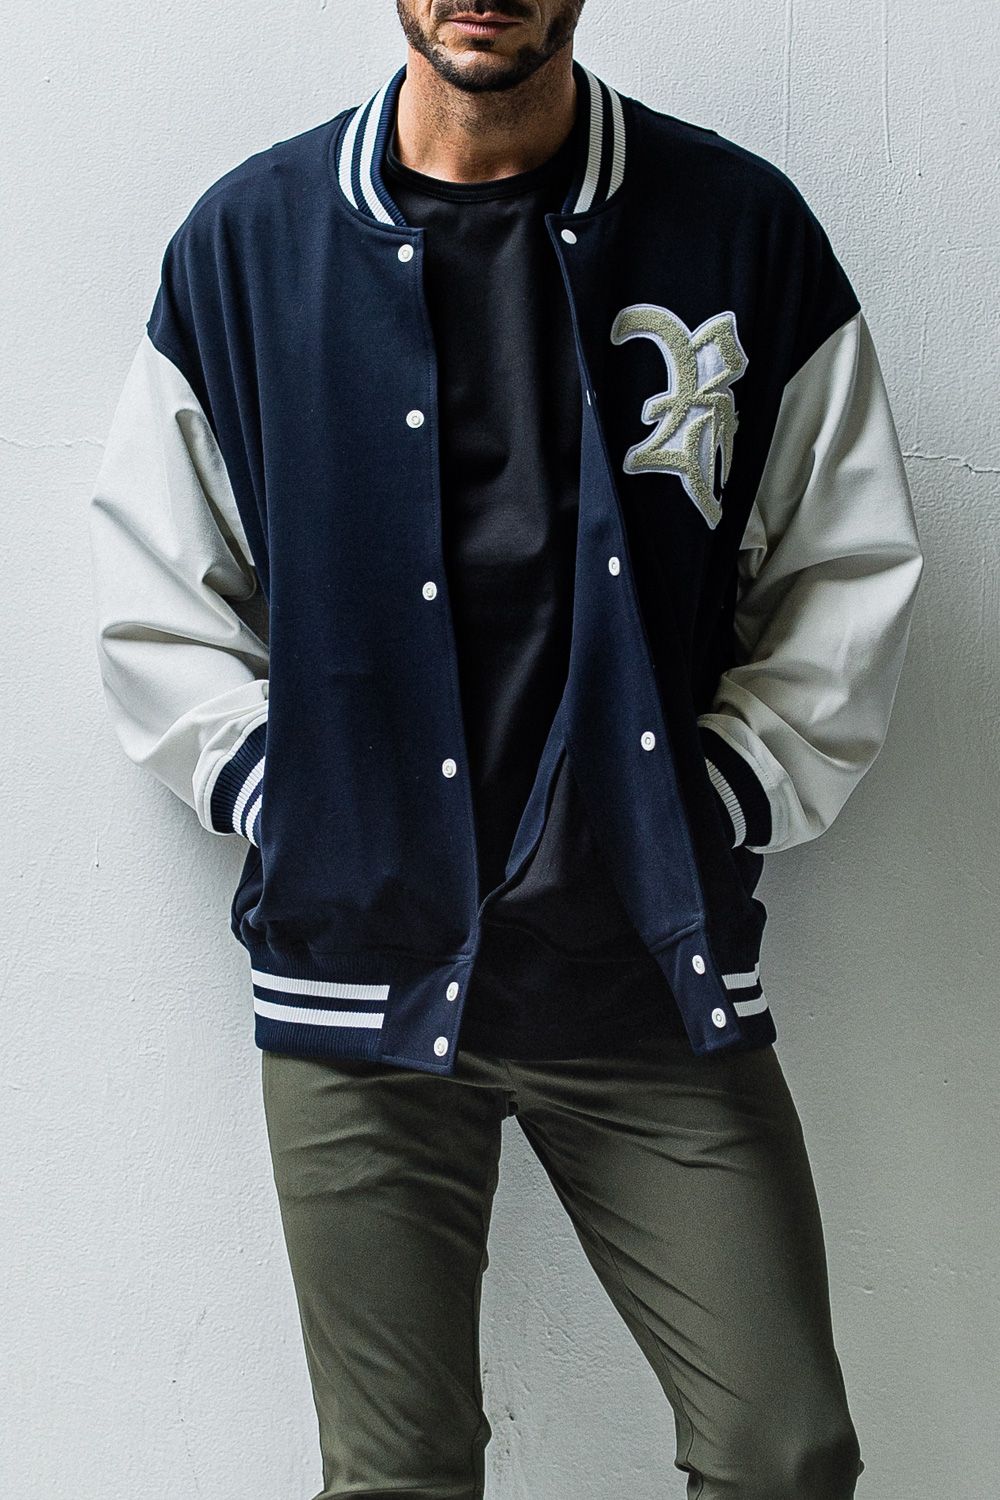 RESOUND CLOTHING - RC JERSEY OVER VARSITY JACKET / RCロゴ ジャージ